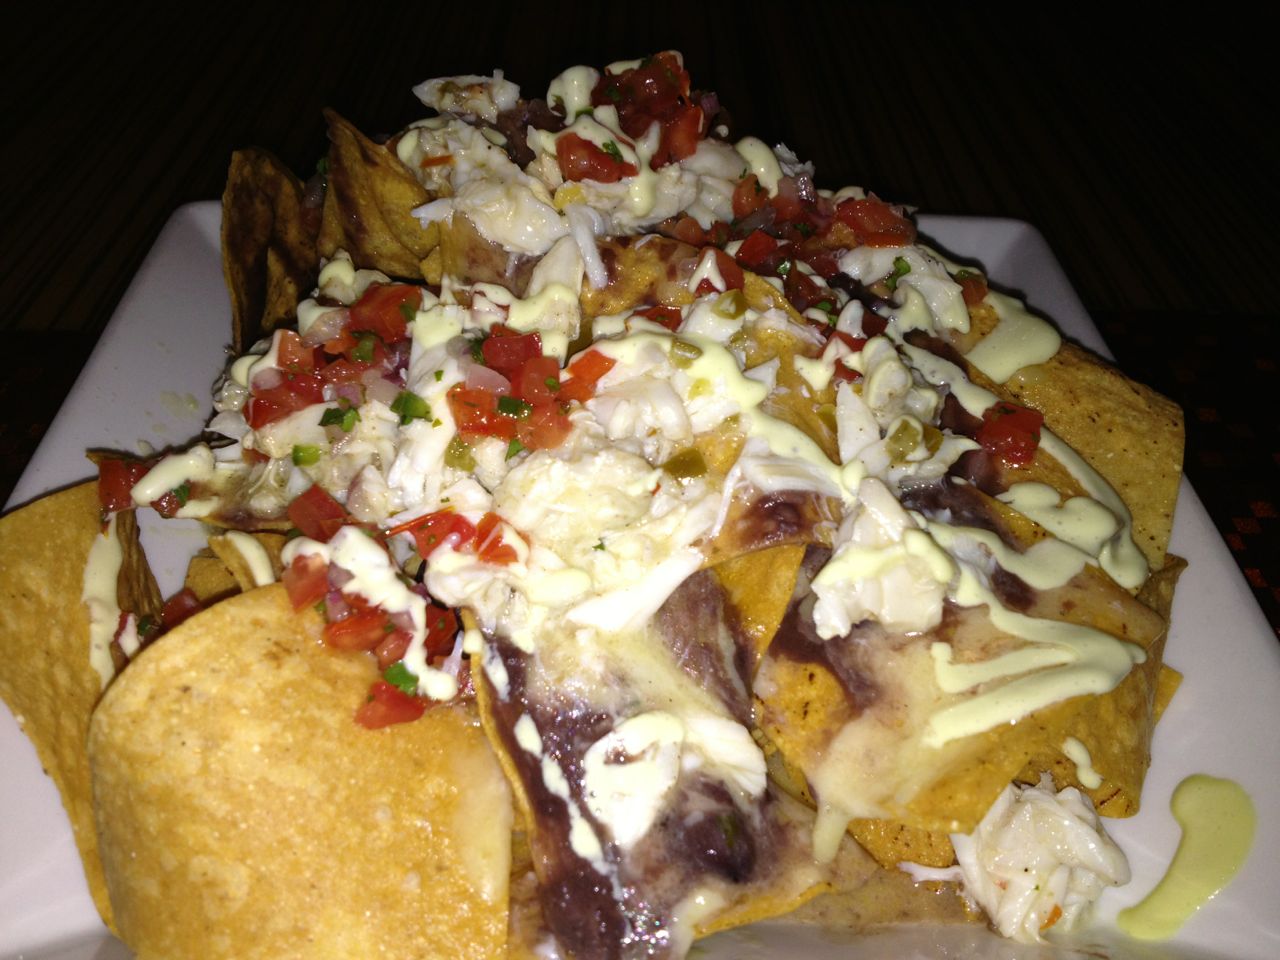 Crab nachos from bluezoo... very happy they're staying (we heard there'd be a rampage if they left :)) - sorry for quality of photo, originally for tweeting not posting